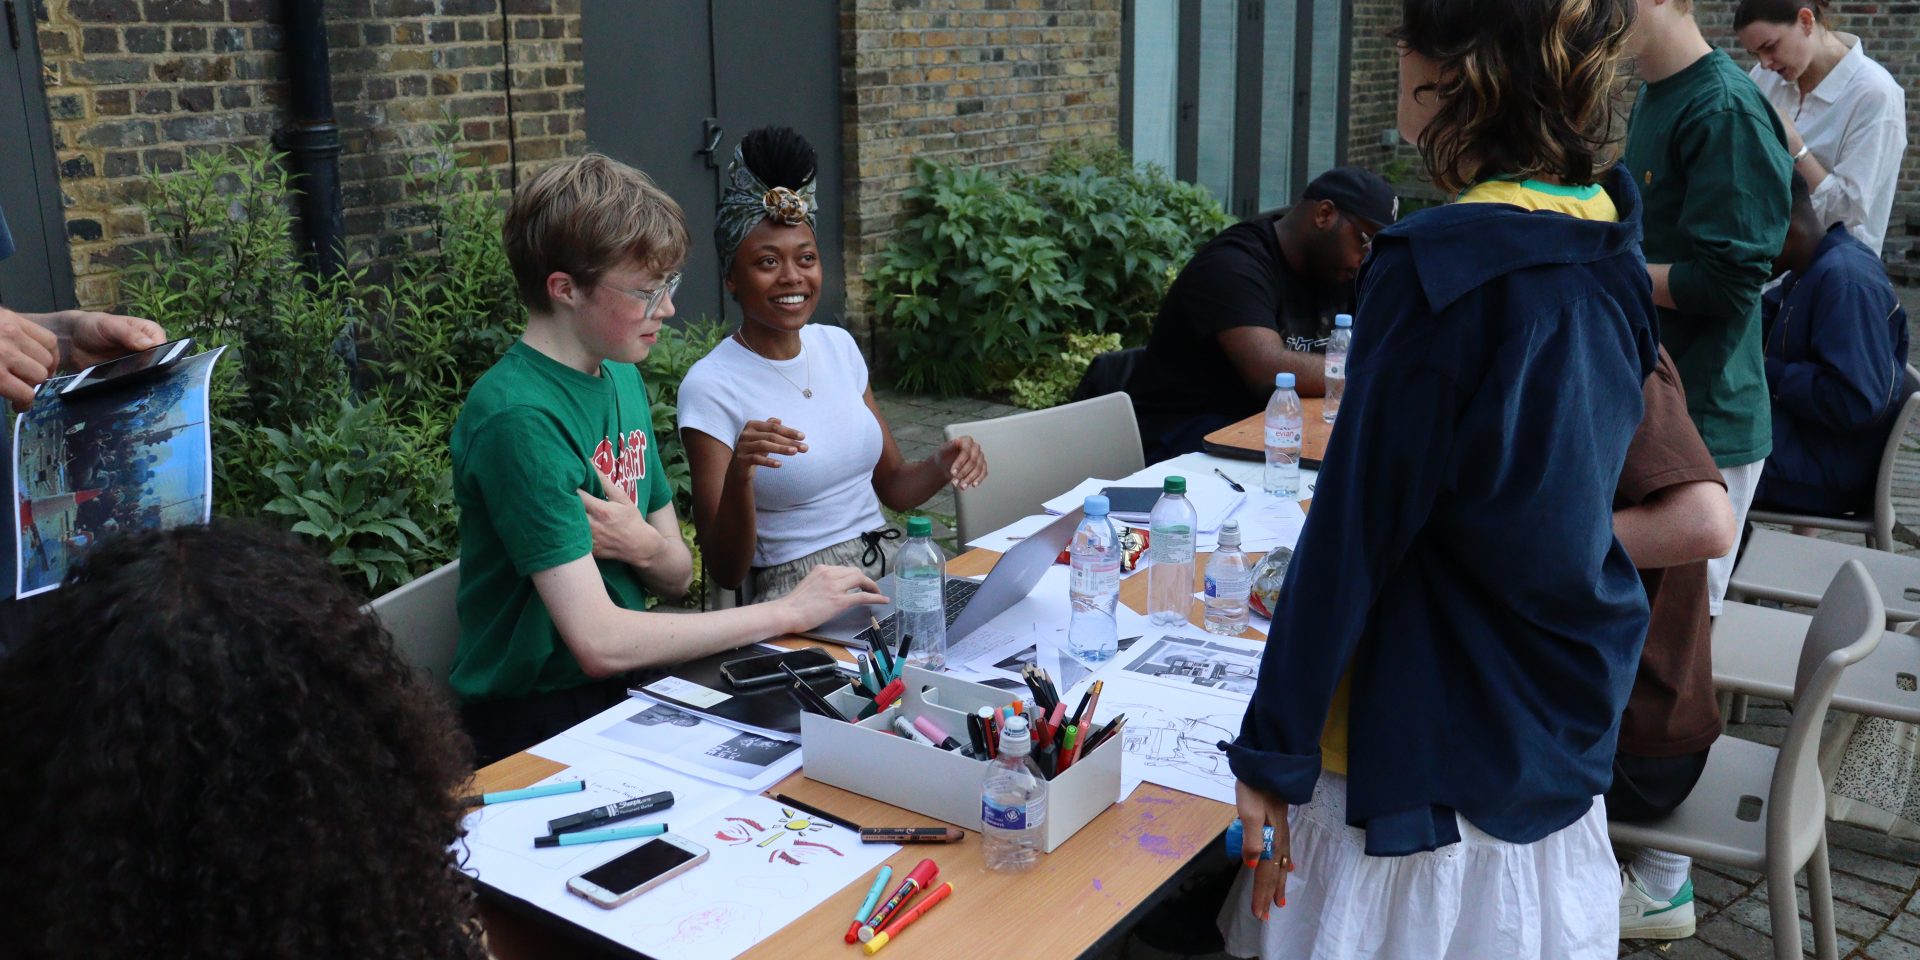 A group of young people are working around a table, smiling and chatting whilst they work on producing their zine